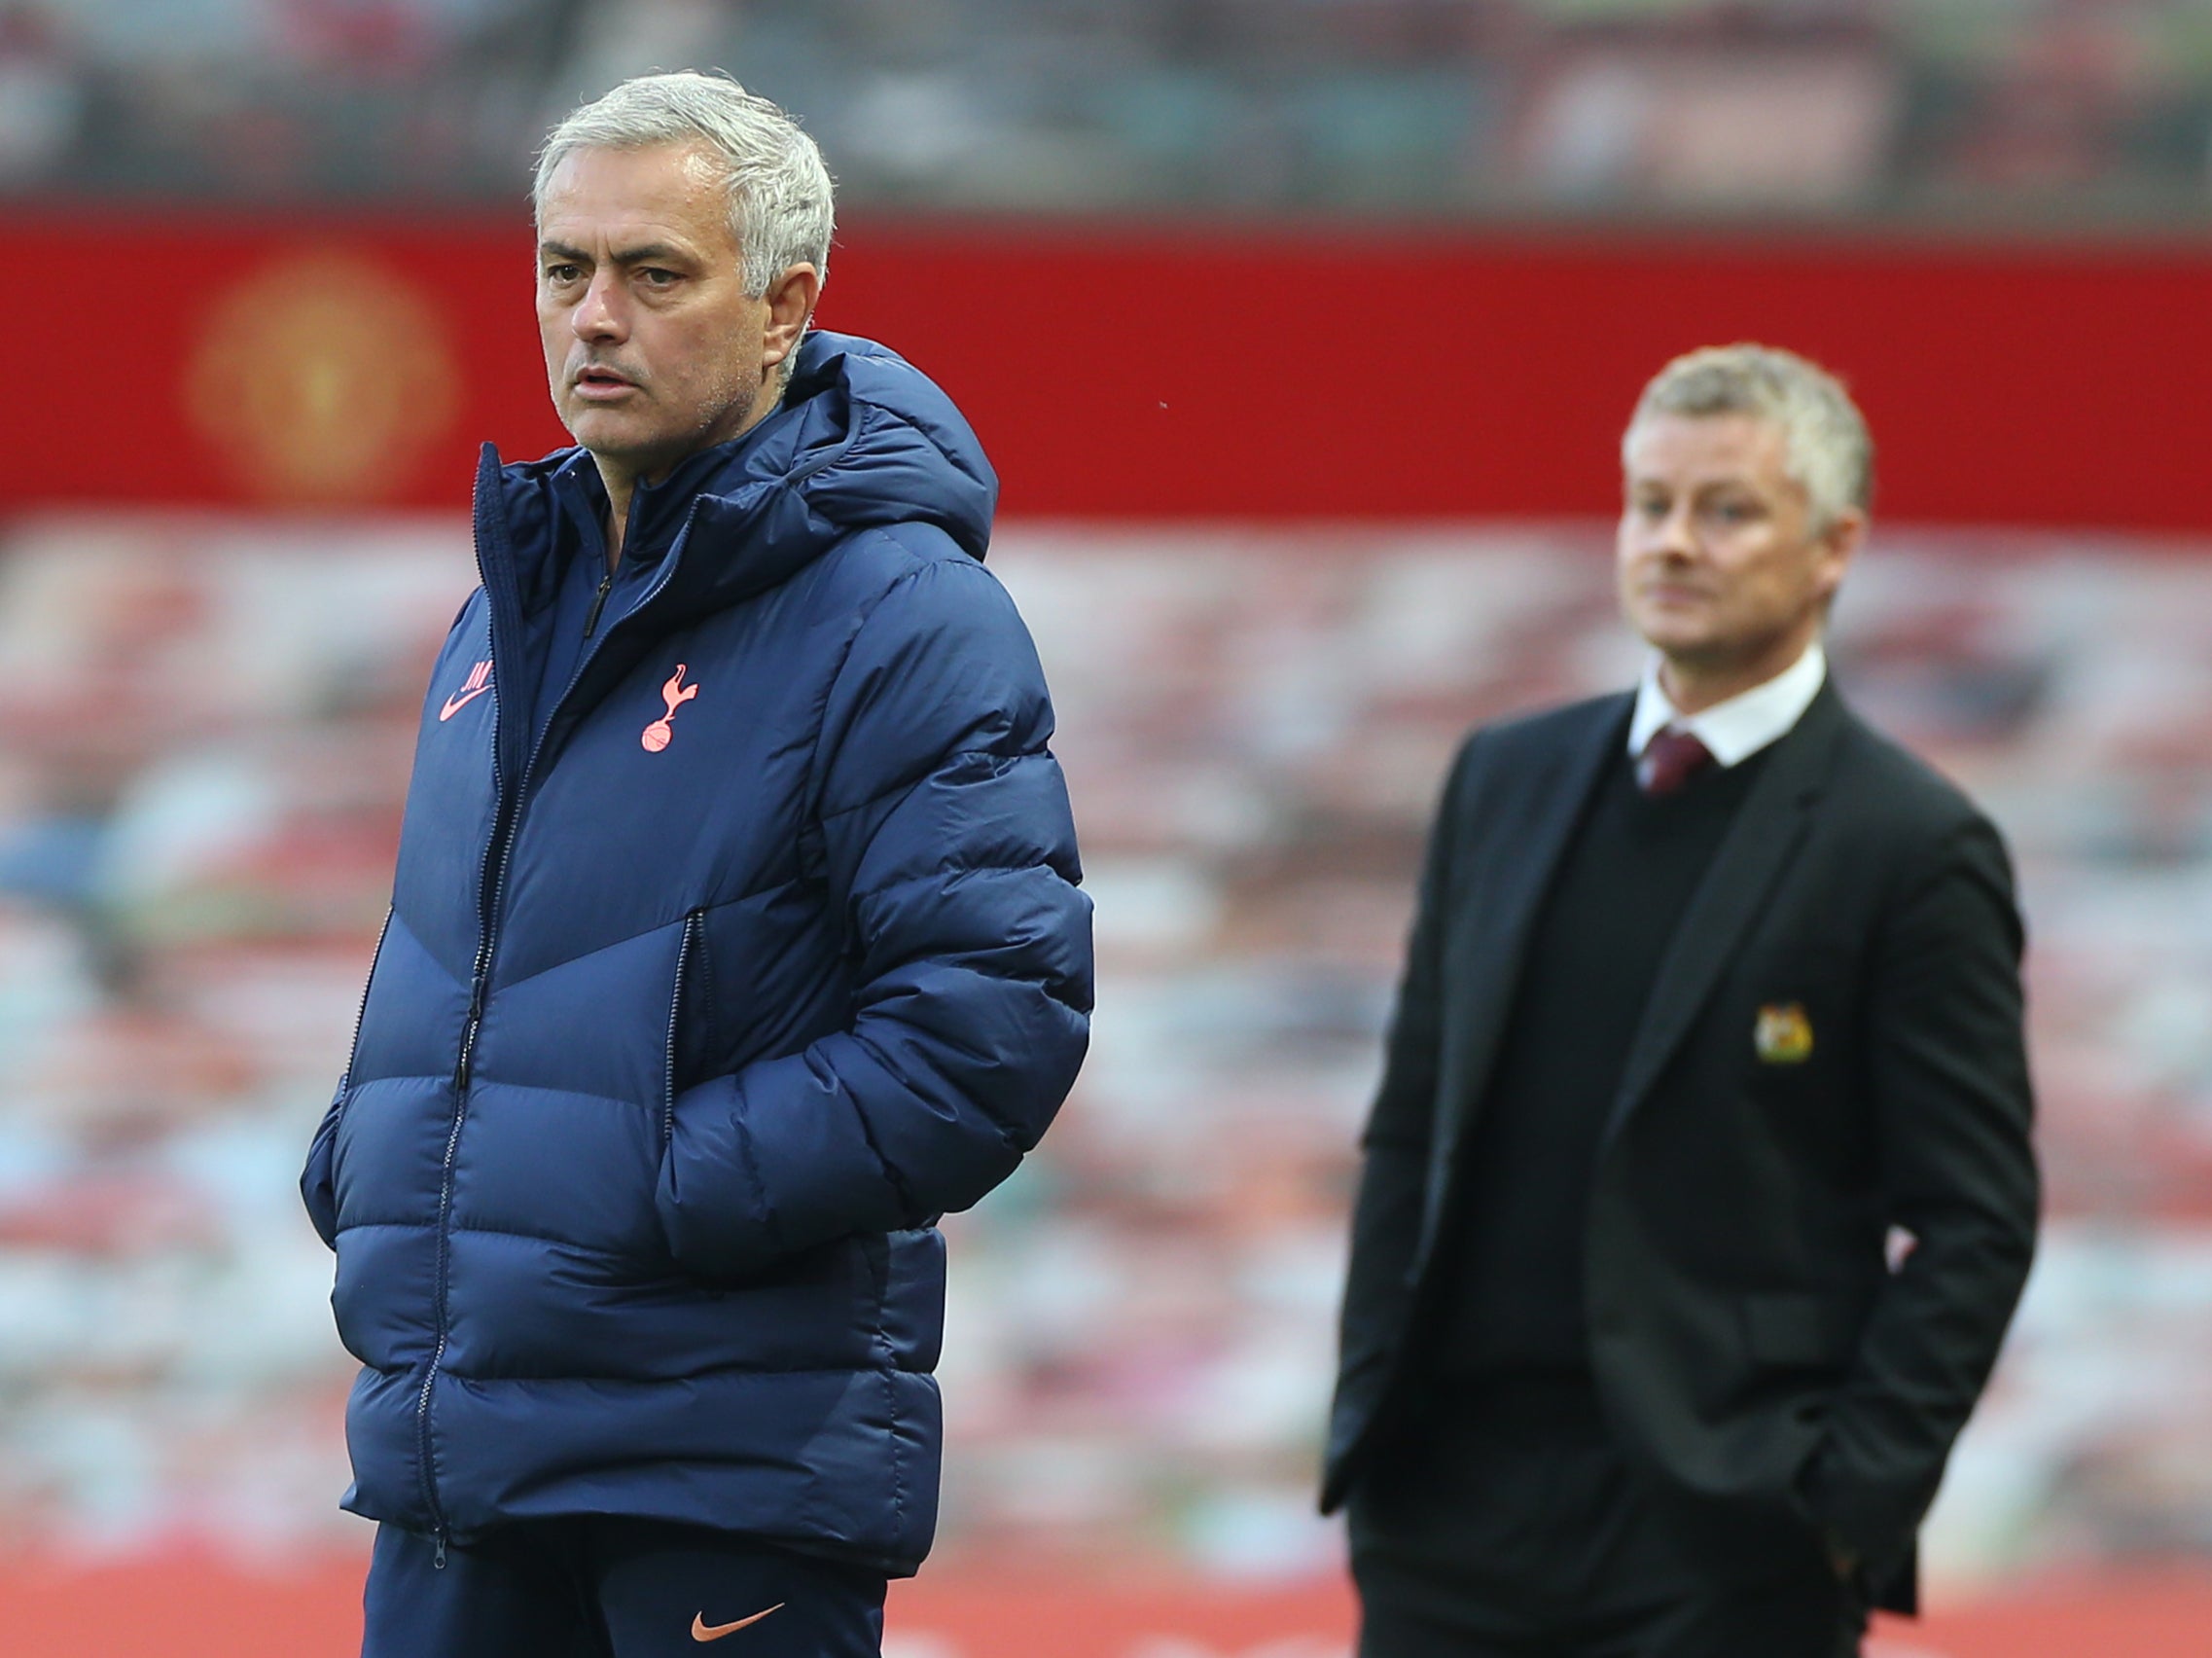 Manchester United Vs Tottenham Jose Mourinho Offers Sympathy To Ole Gunnar Solskjaer After 6 1 Humiliation The Independent